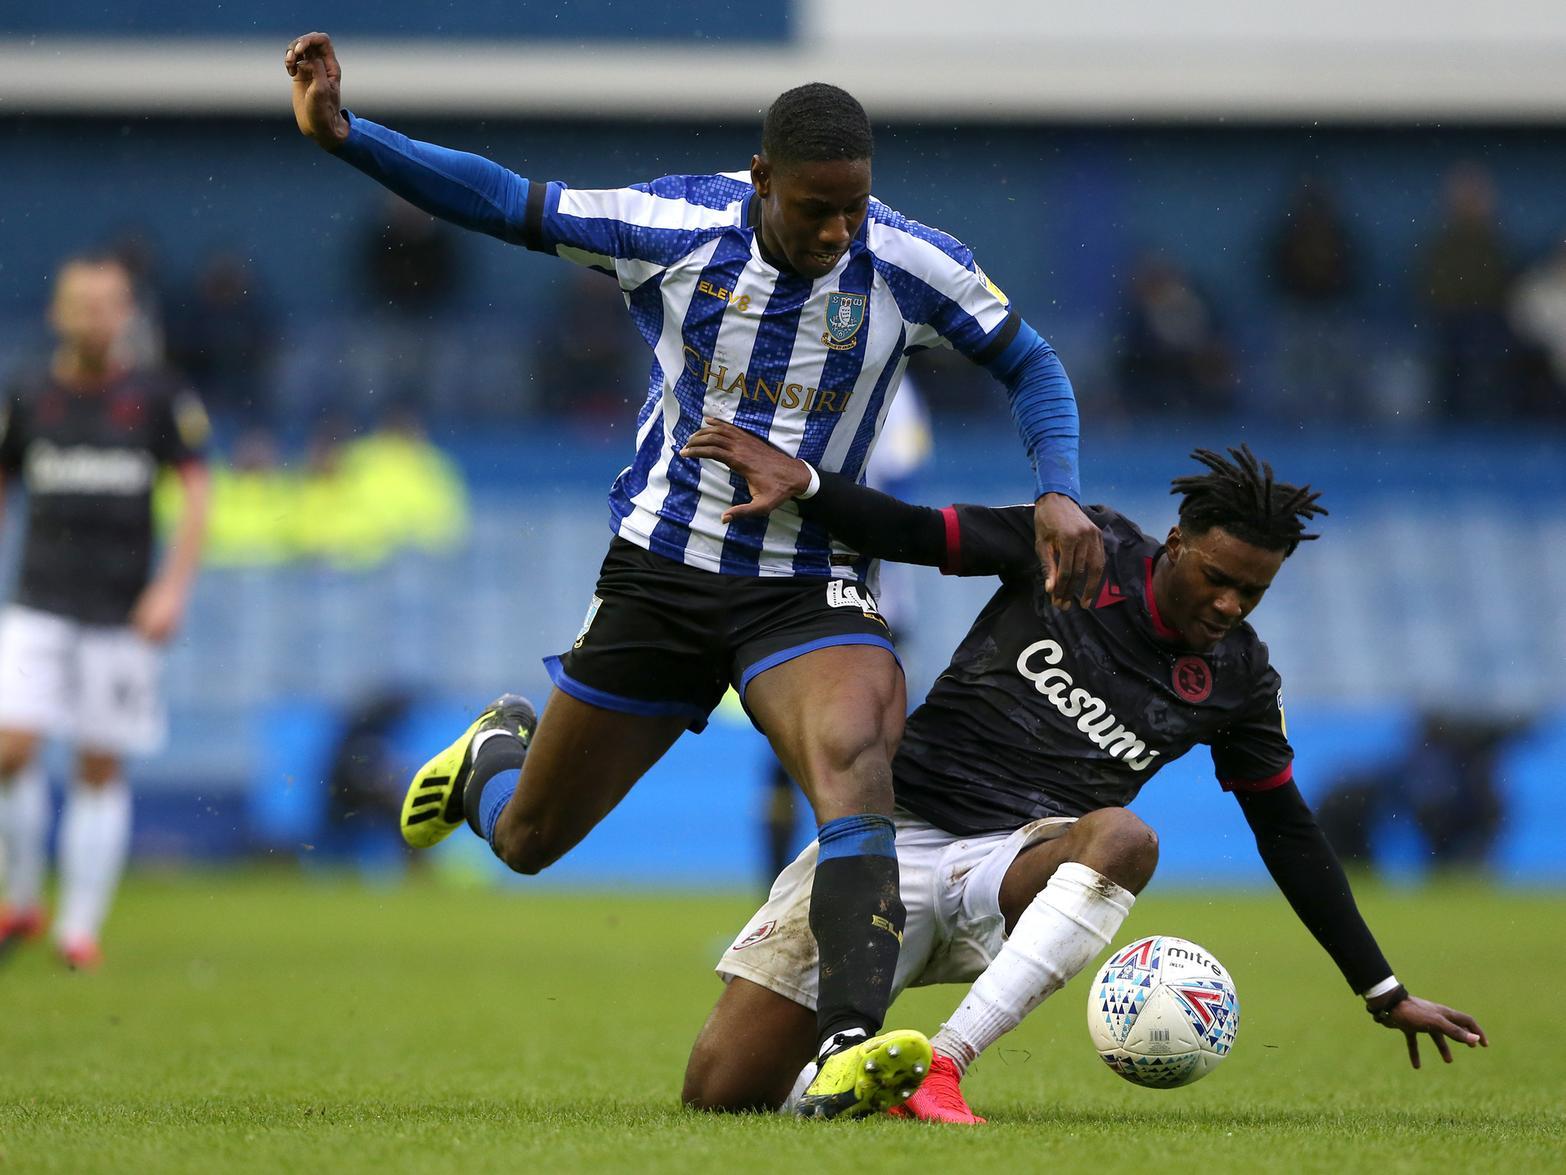 Sheffield Wednesday boss Garry Monk has backed youngster Osaze Urhoghide to bounce back from his red card against Reading, and to thrive in the future when deployed as a centre-back. (Sheffield Star)